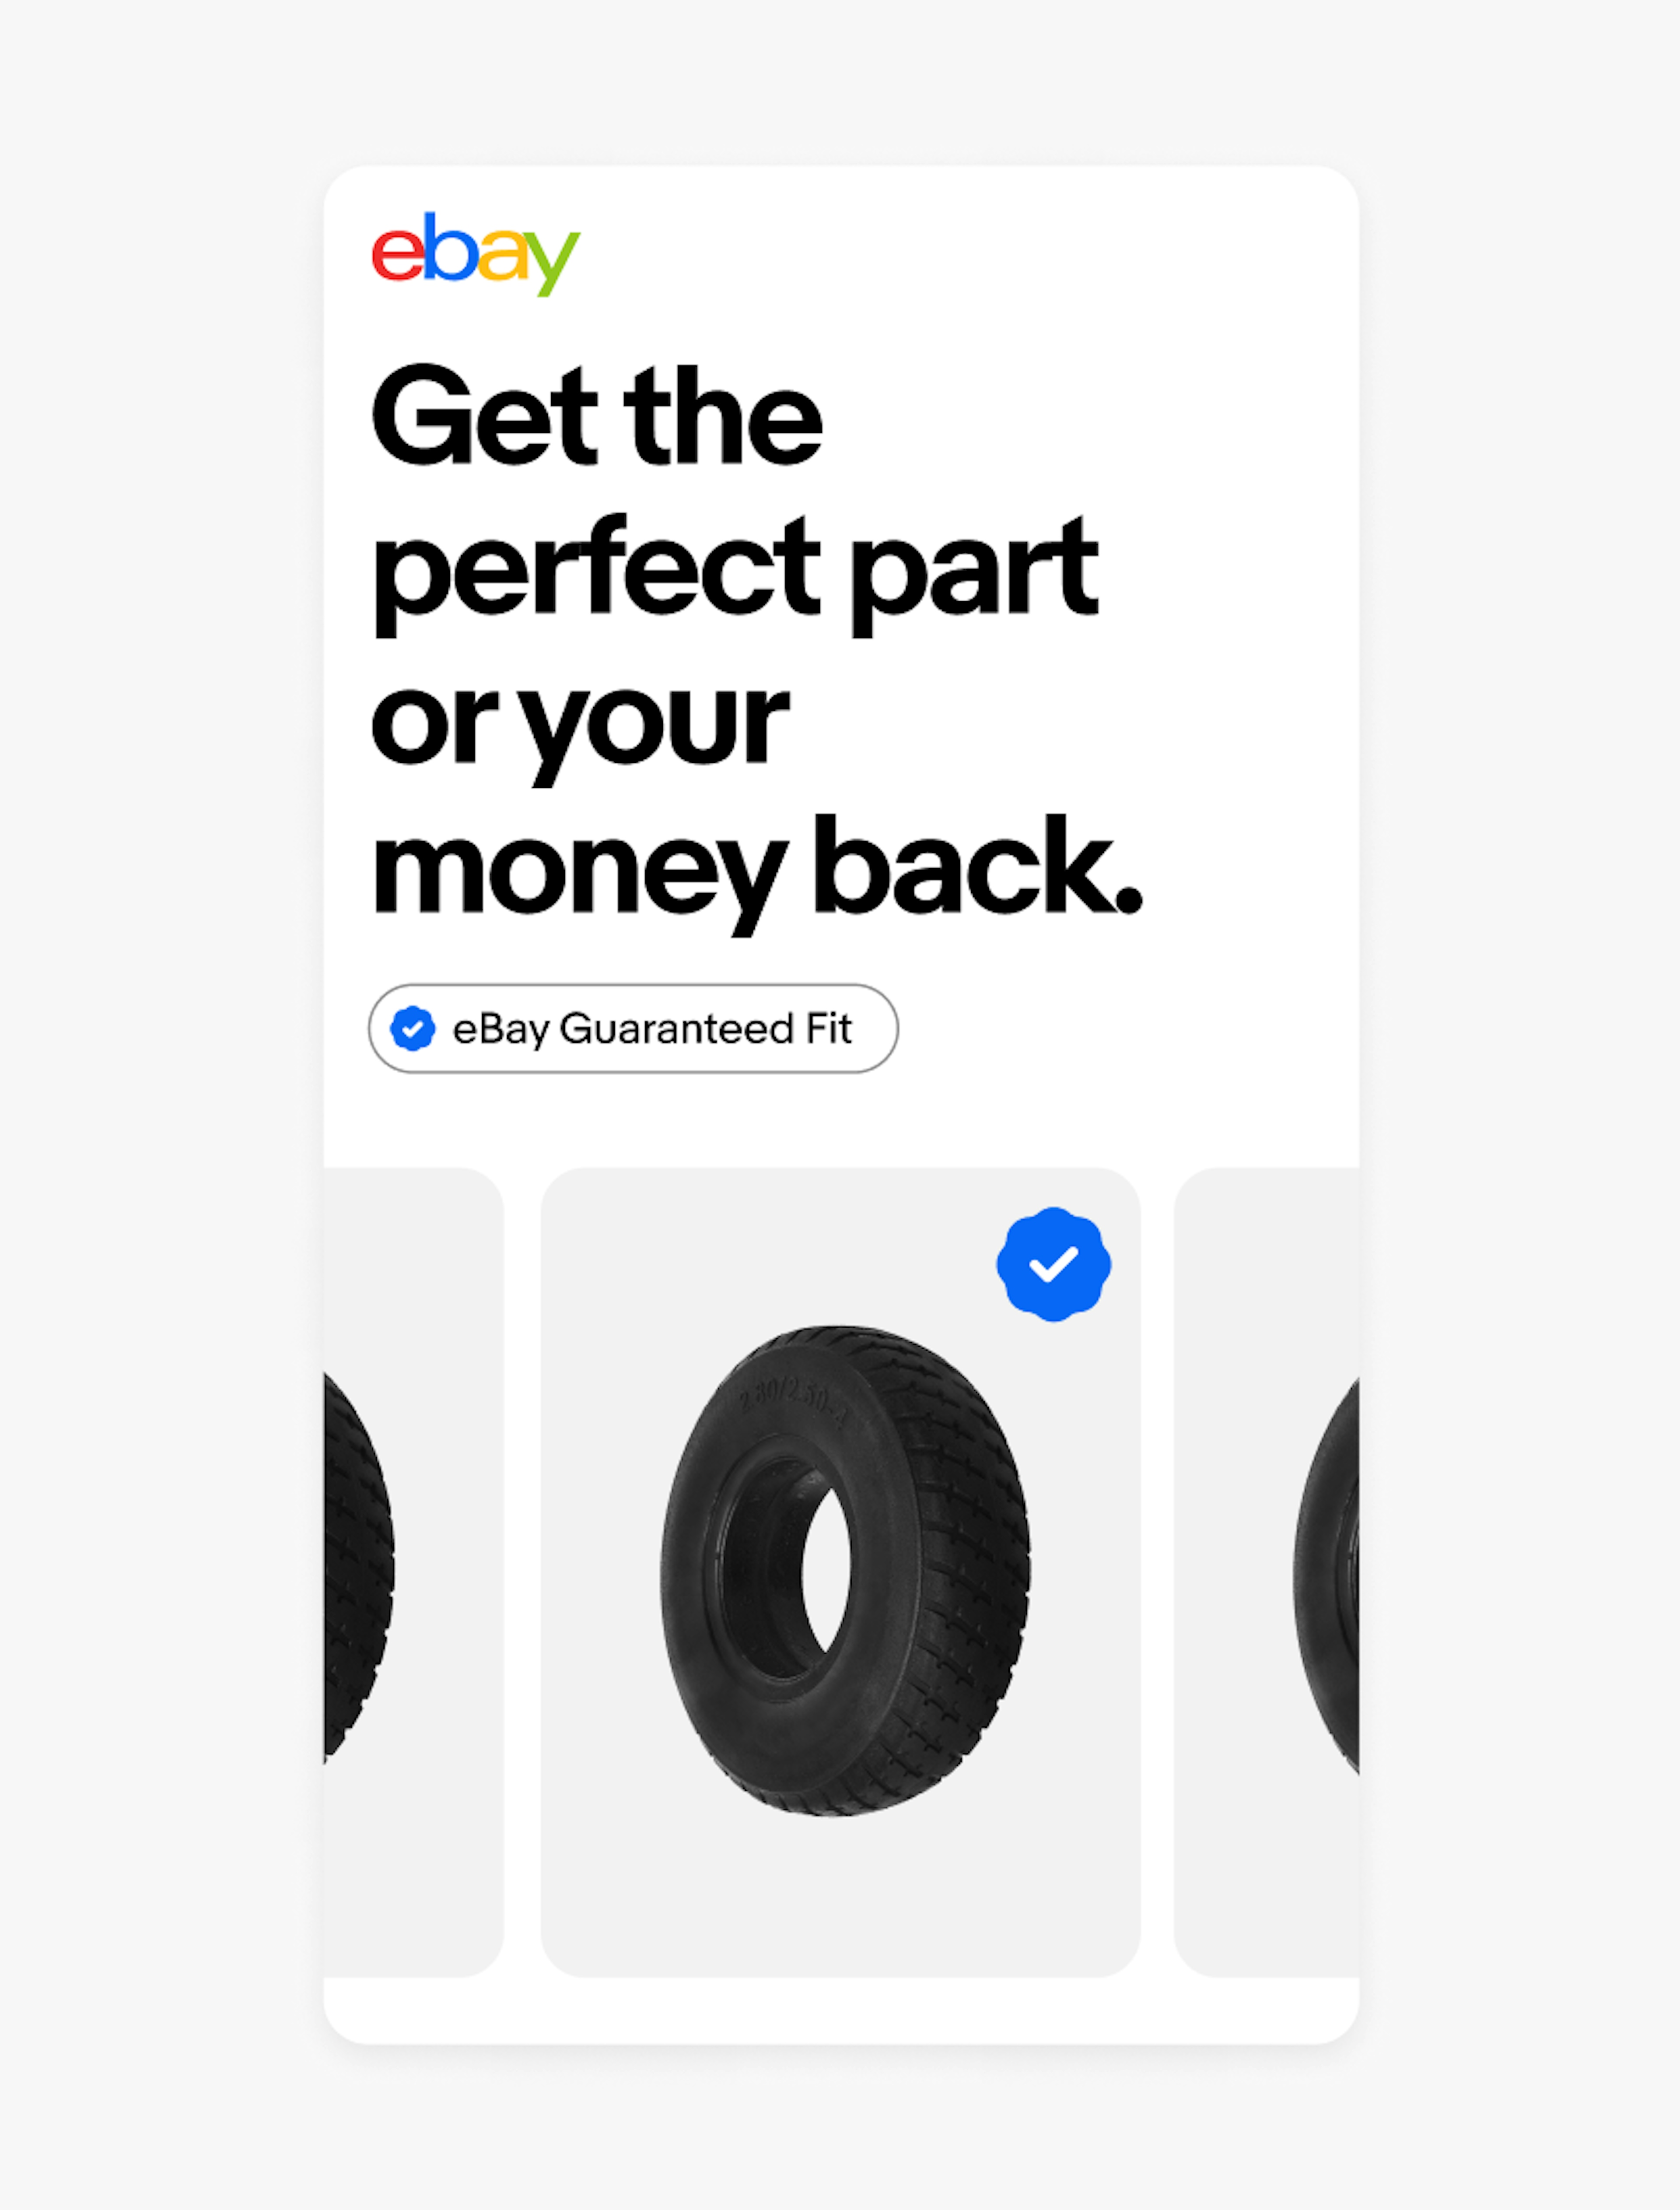 A social ad for eBay Guaranteed Fit. The heritage logo is in the upper left on a white background.